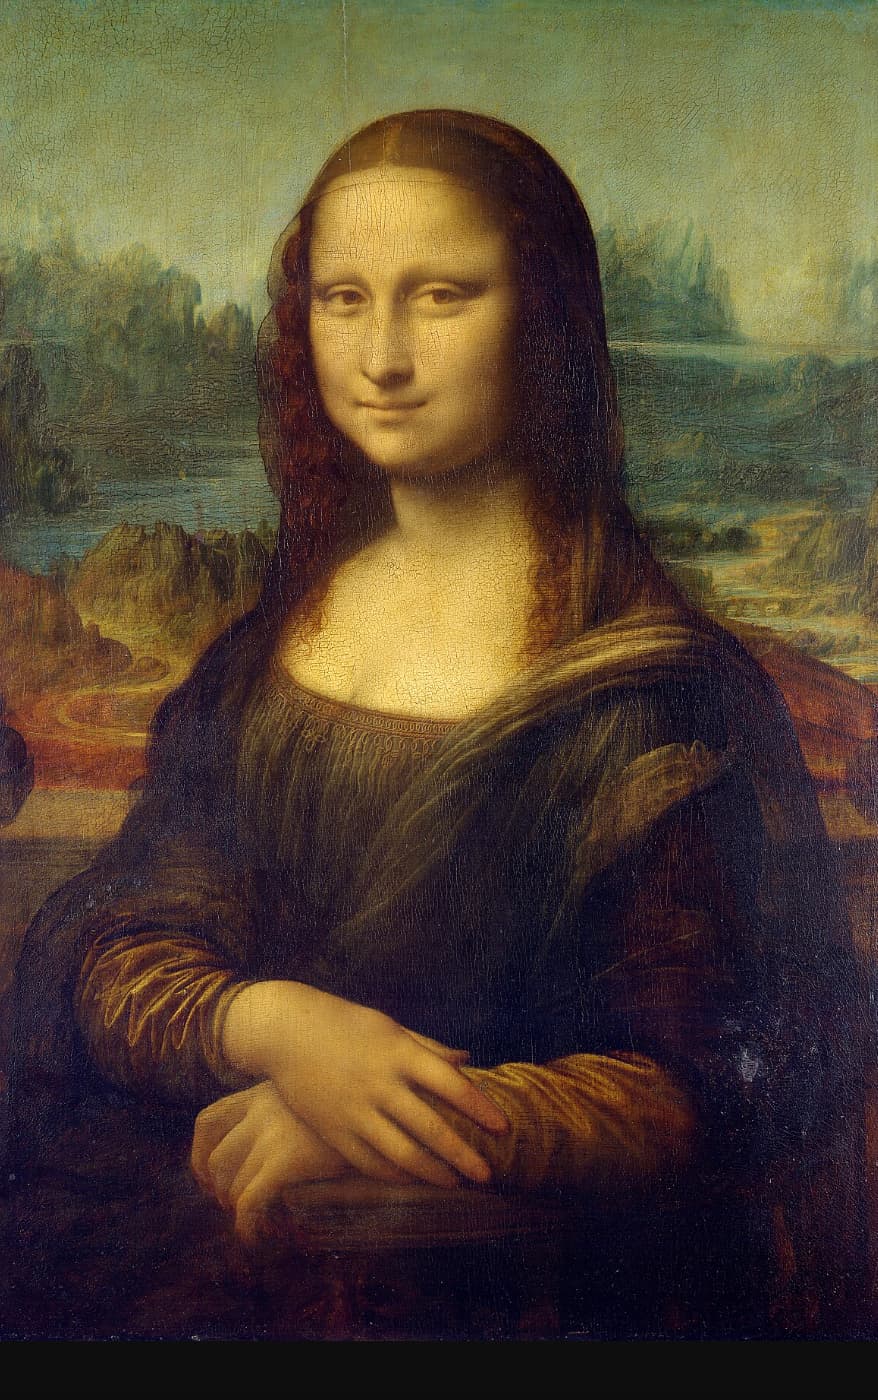 “In 1911, Vincenzo Peruggia, wanting to bring the Mona Lisa back to Italy after 'It was stolen by Napoleon', simply walked in the Louvre, lifted off the painting, took it to a nearby service staircase, removed the frame, put it under his smock, and simply walked out with it in plain sight.”